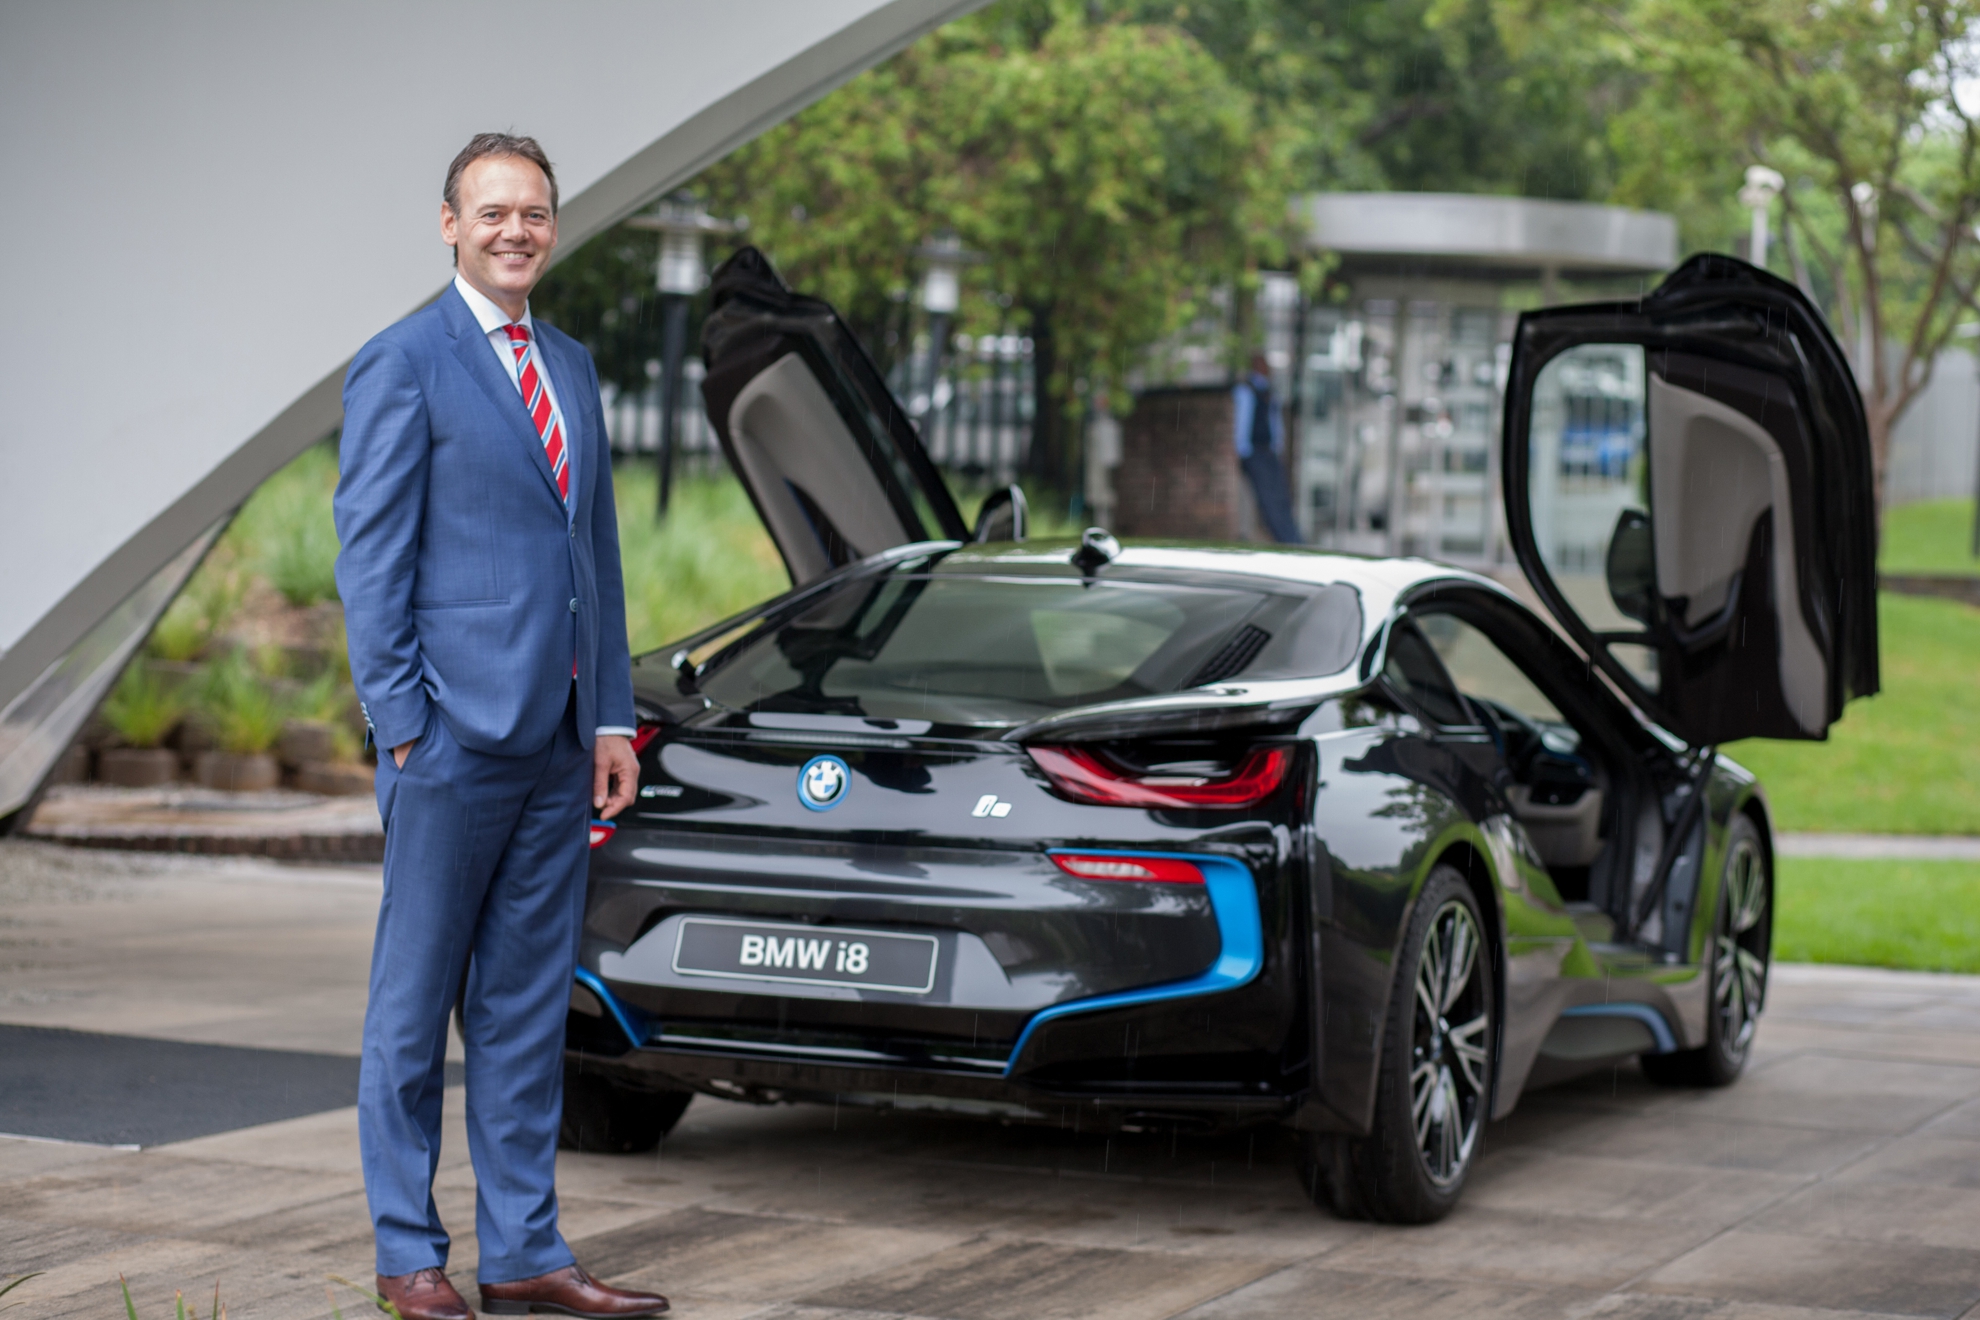 Mr Diederik Reitsma – The new General Manager for Group Communications at BMW Group South Africa